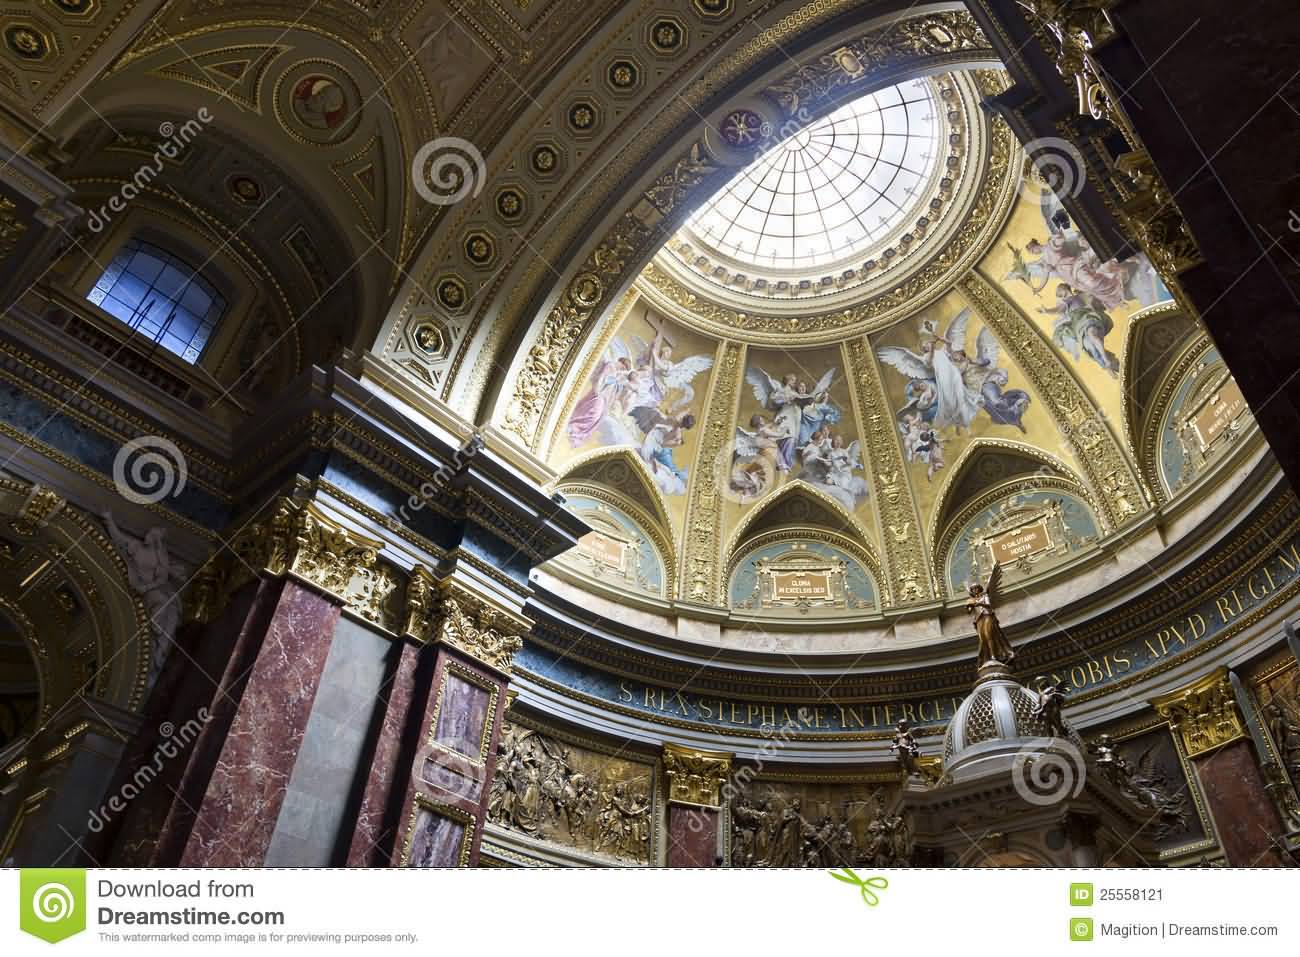 Incredible Inside View Of The St. Stephen’s Basilica